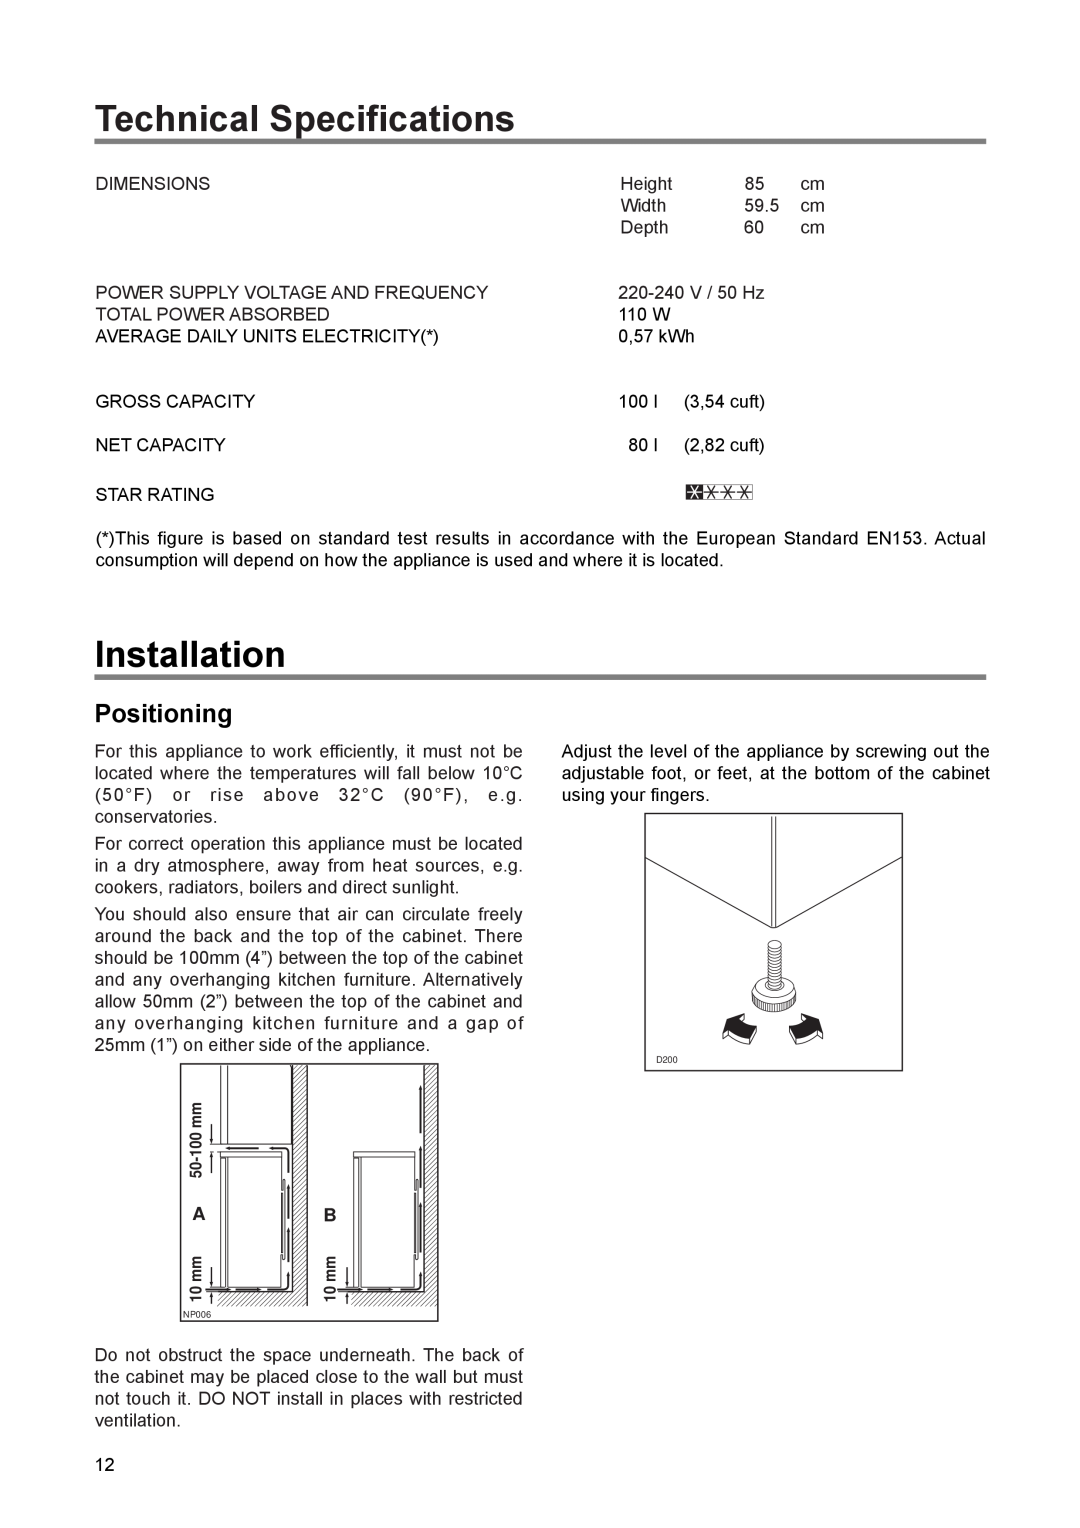 Zanussi ZUF 65 W 1, ZEF 90 W 1 manual Technical Specifications, Installation, Positioning 